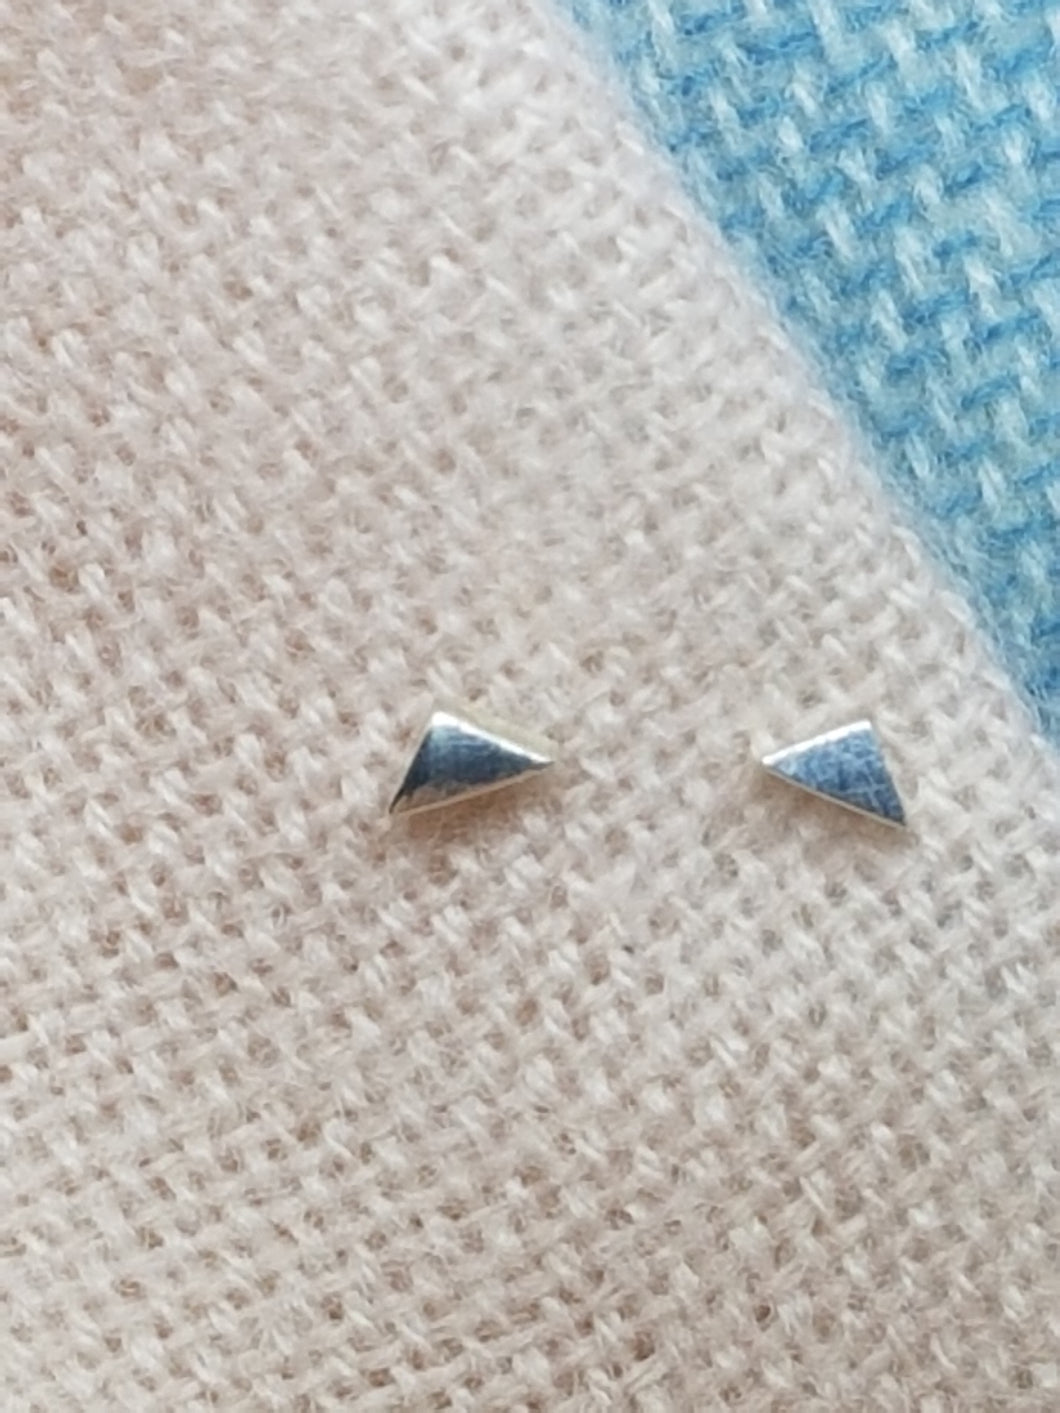 Tiny sterling silver 3d triangle stud earrings